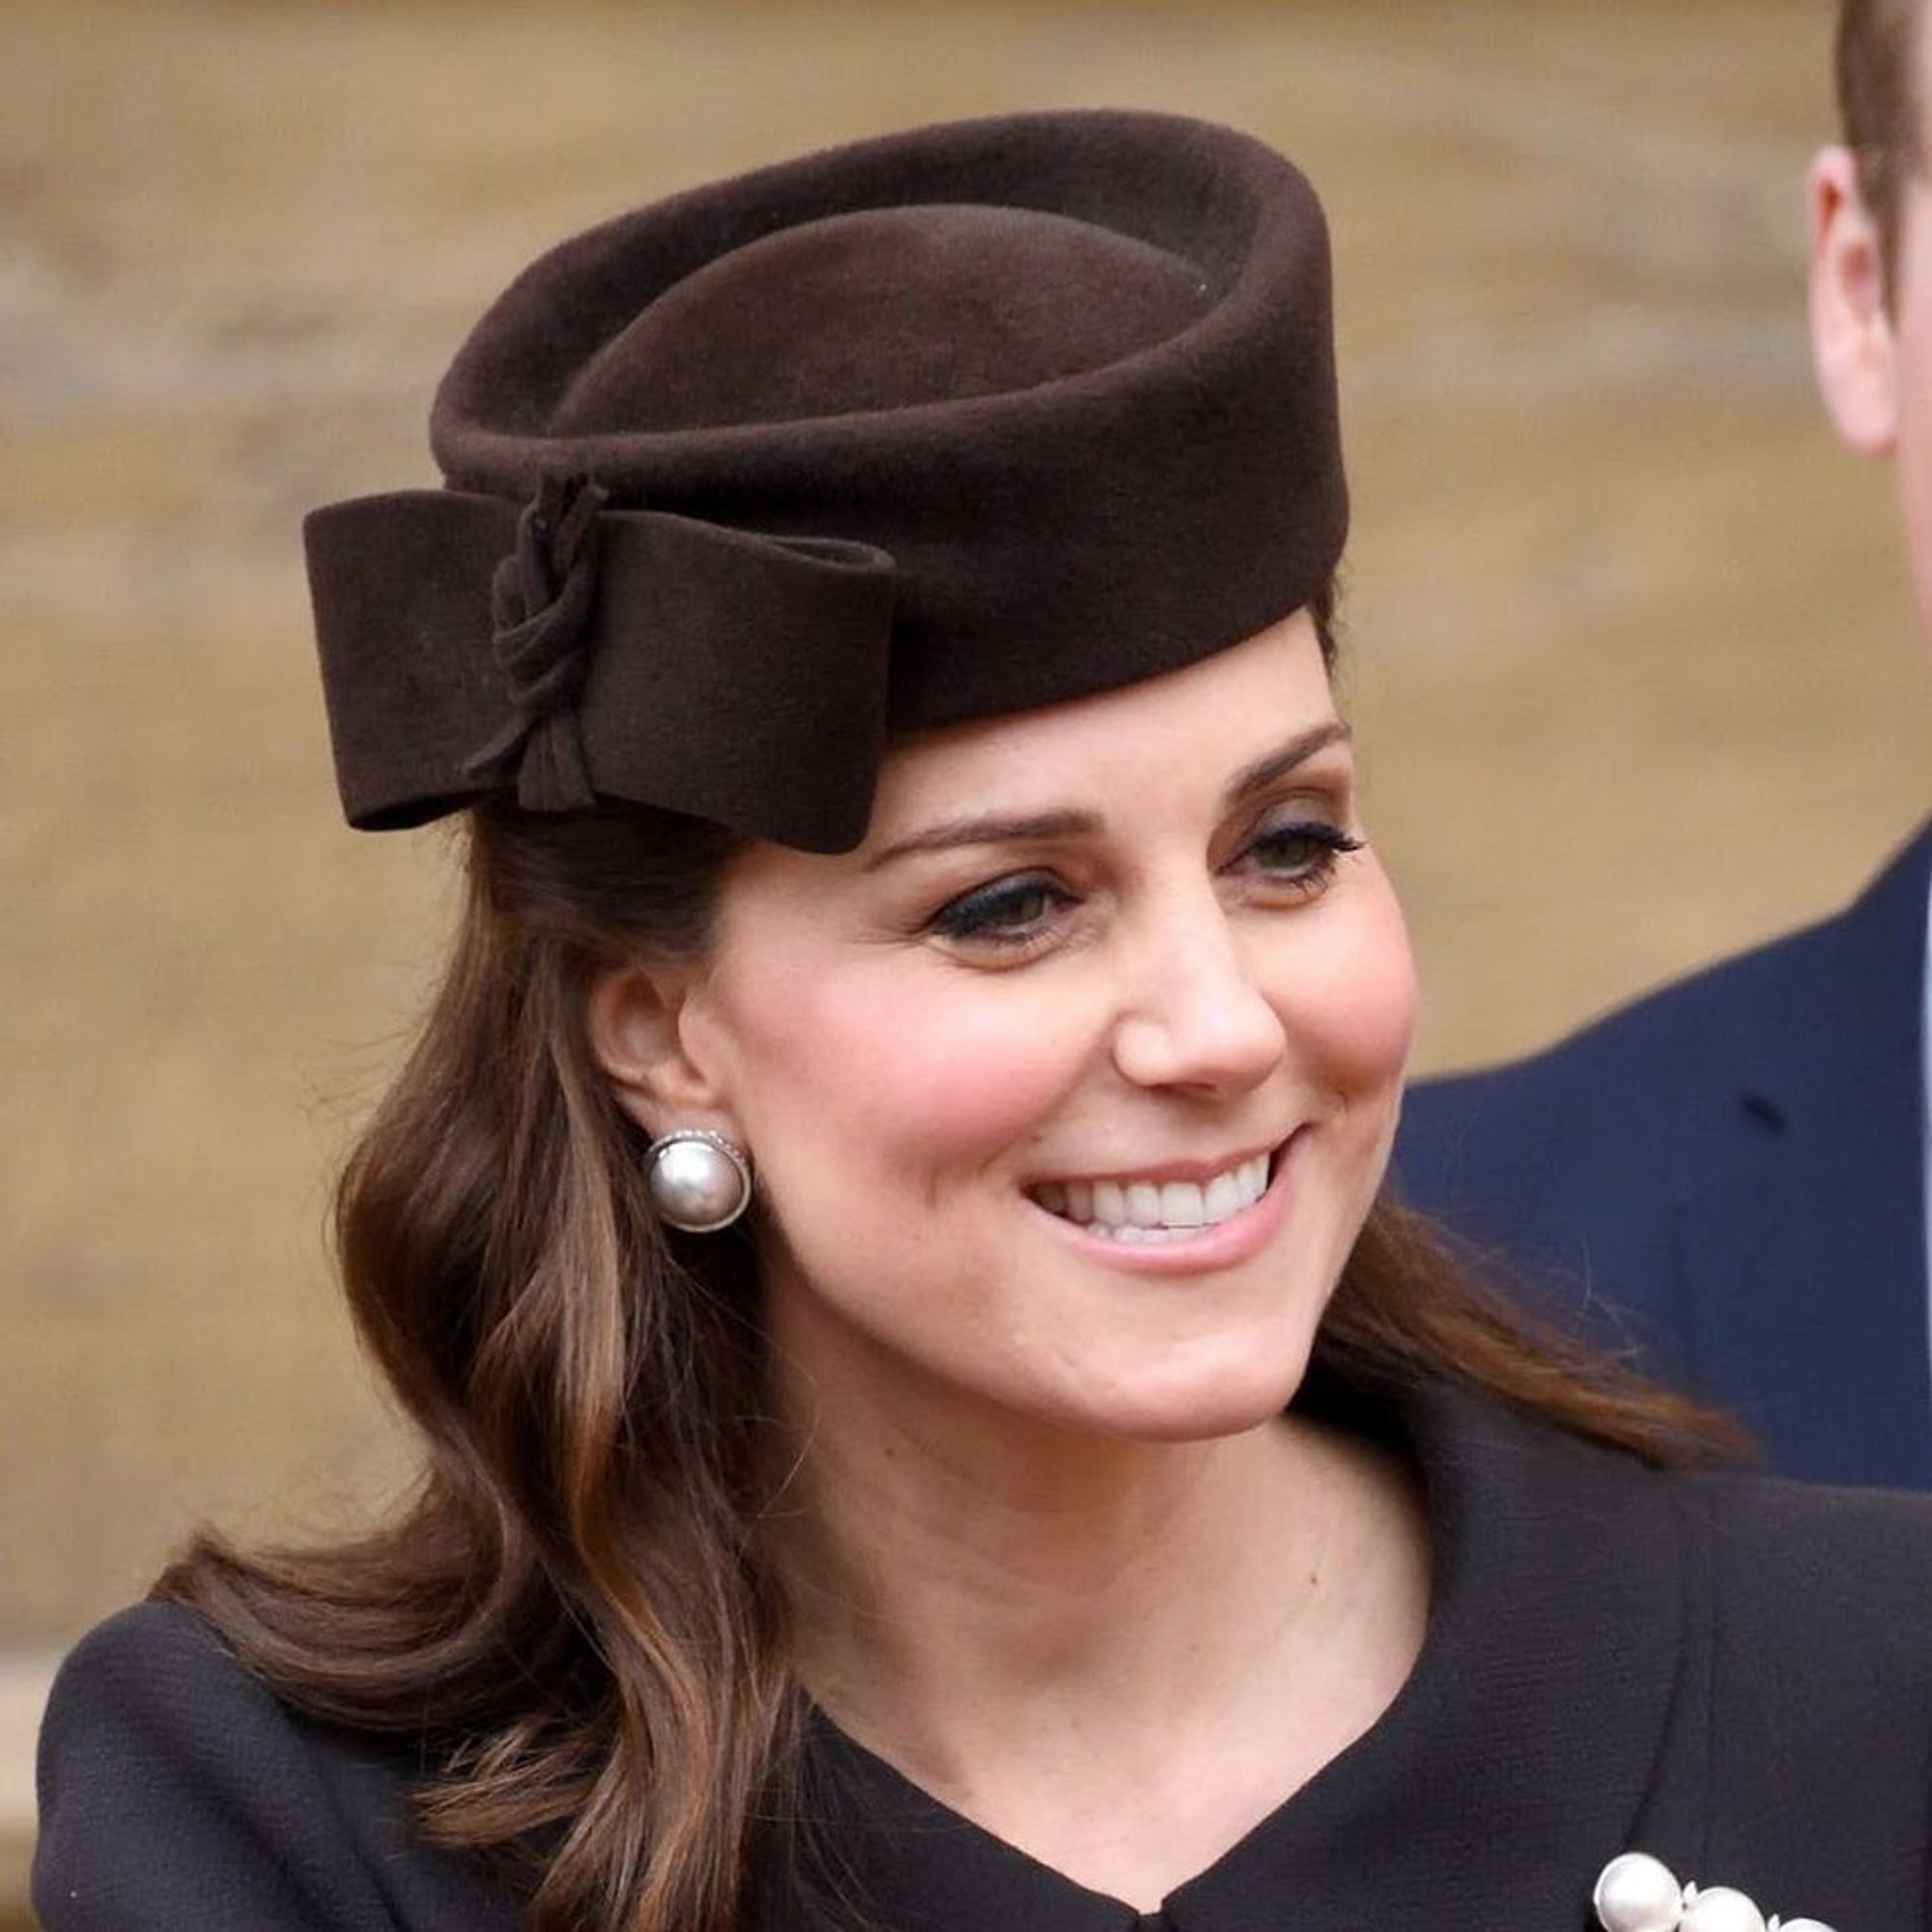 Kate Middleton Makes a Surprise Easter Appearance in Pearls - Brit + Co